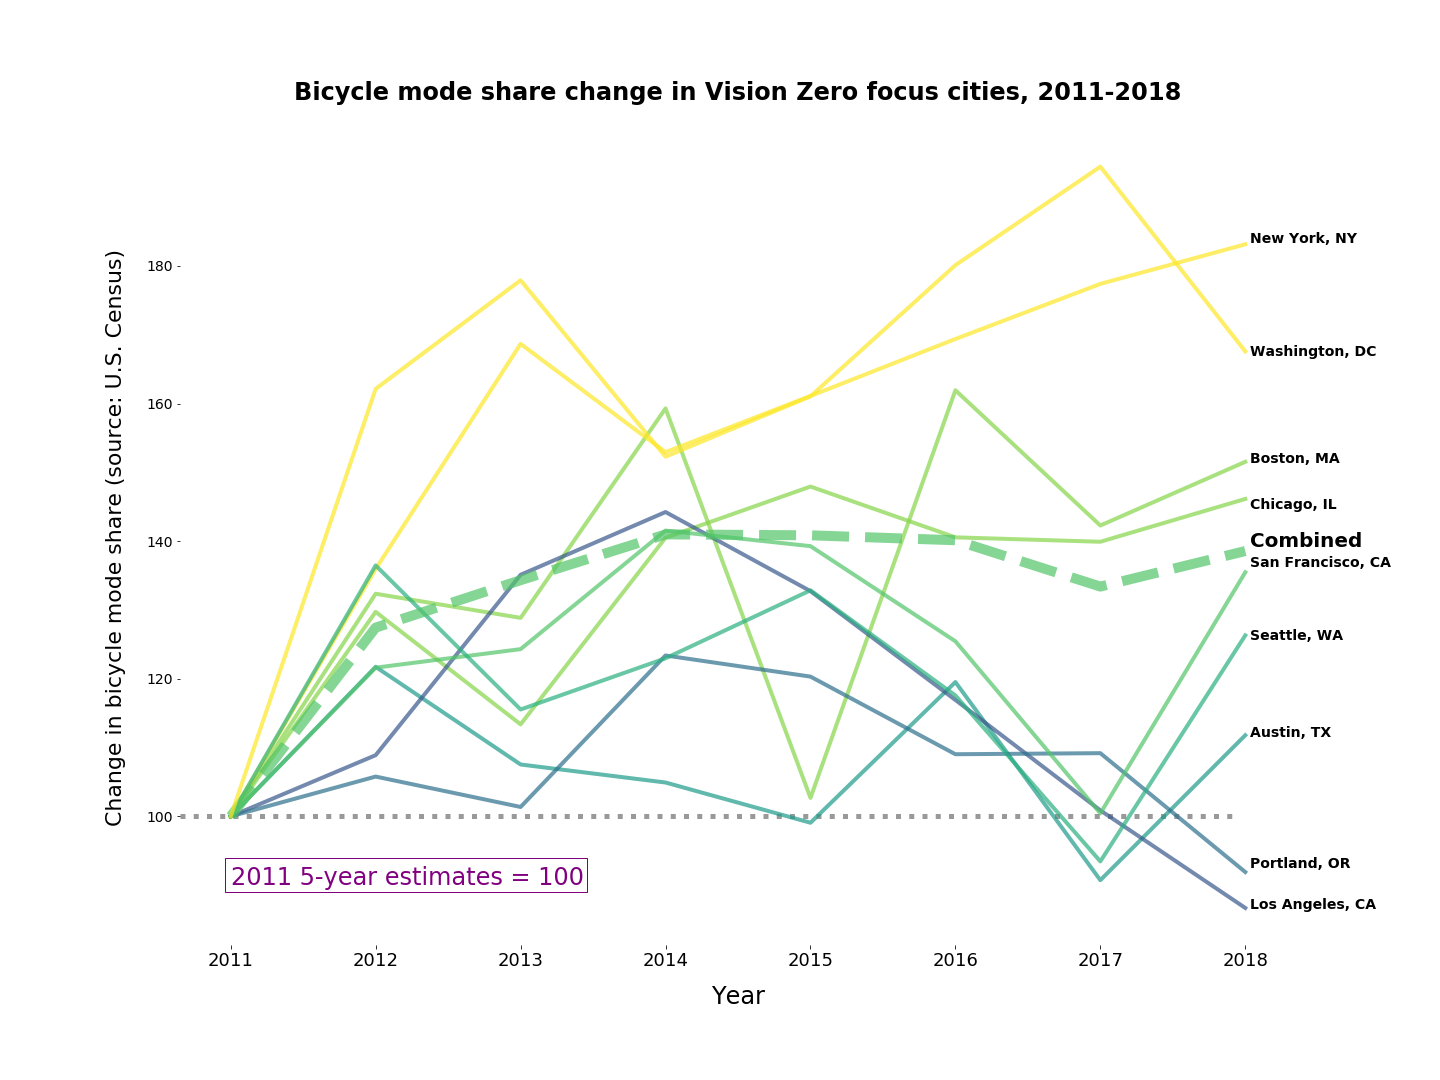 Graph showing cycling rates in nine Vision Zero cities from 2011-2018. Generally rising until 2014 and then noisy but flat.